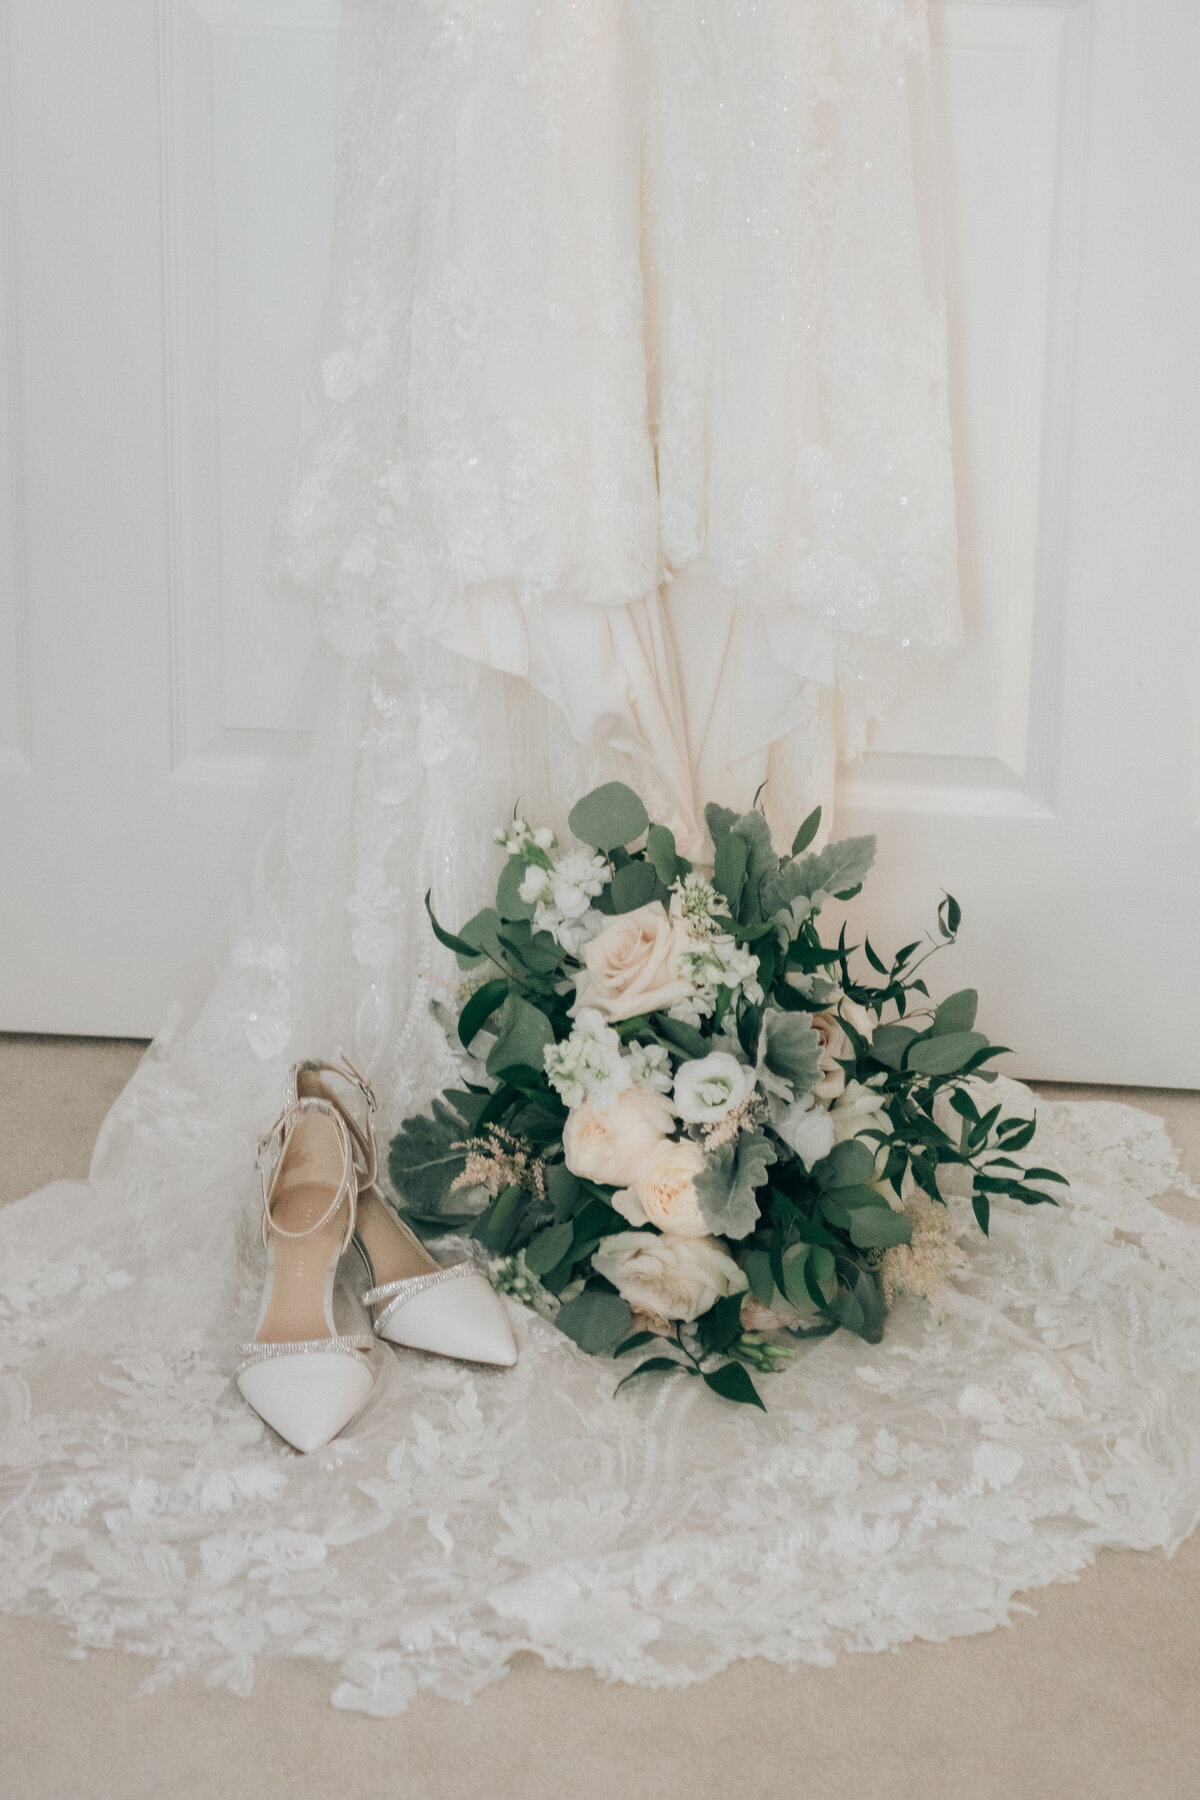 The bride's shoes and wedding bouquet on a lace wedding gown